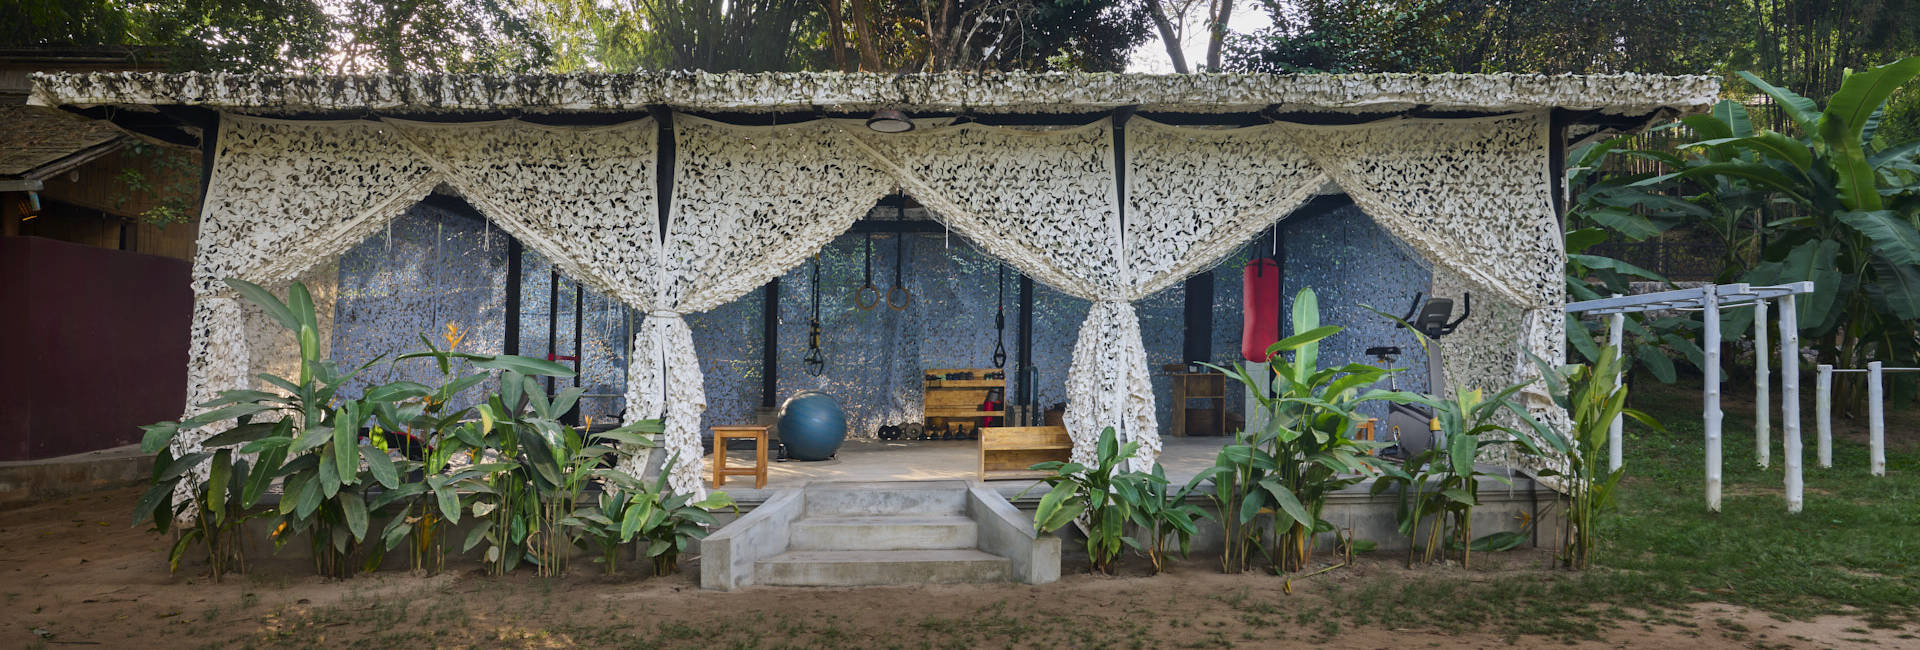 A luang prabang in the middle of a grassy area, adorned with curtains and plants.